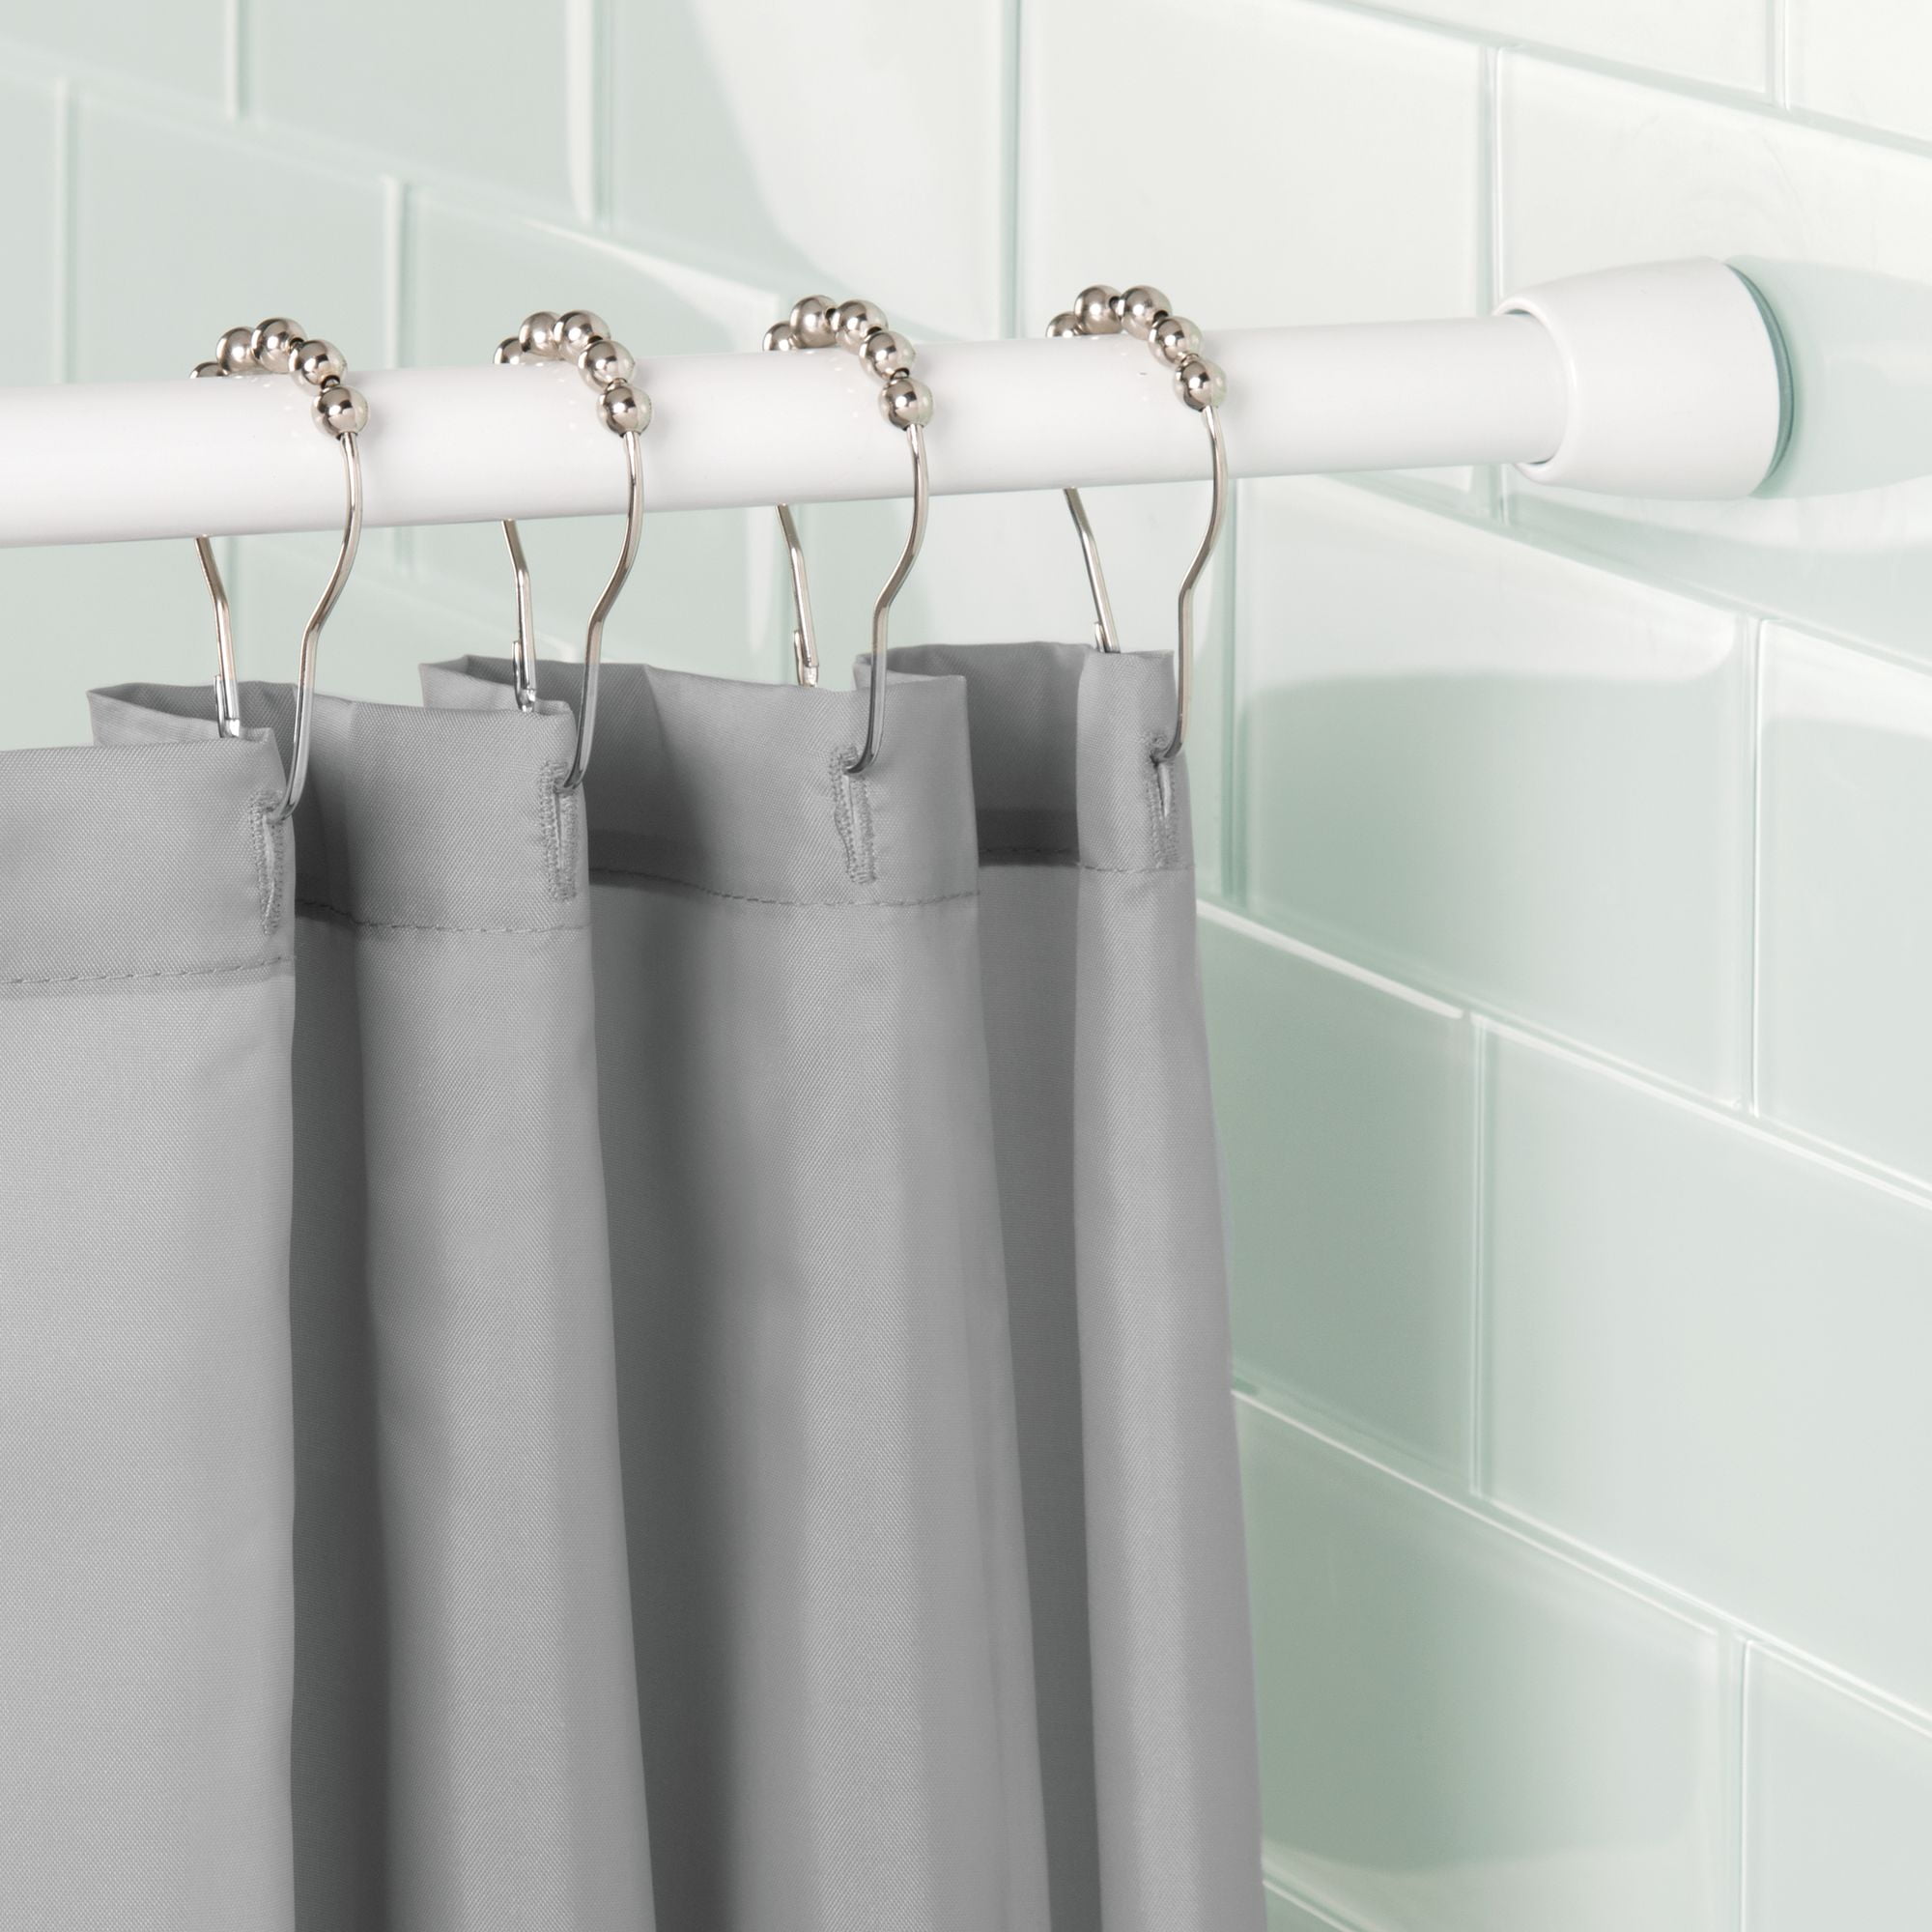 Interdesign Shower Curtain Tension Rod, How To Put Up A Spring Loaded Shower Curtain Rod